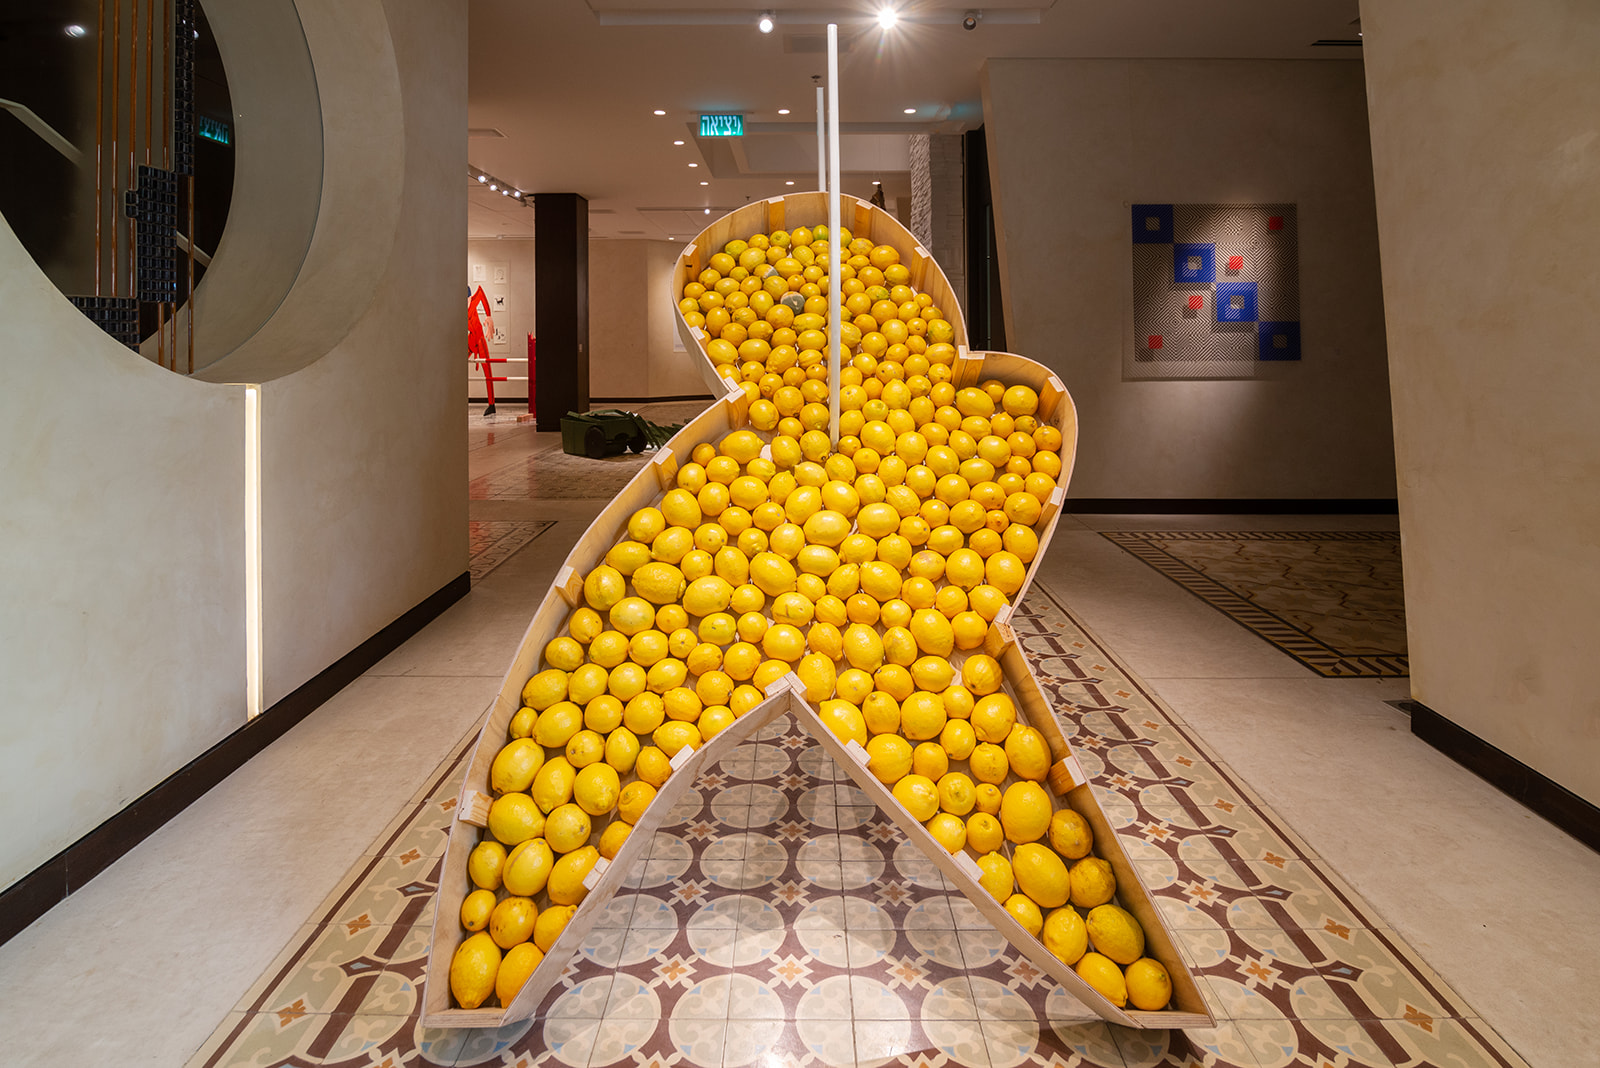 Chen Flamenbaum, Figure no 5, 2022, stainless steel, plywood and 60 kg of fresh lemons, 125X200X250 cm<br />
Photography: Neta Cones